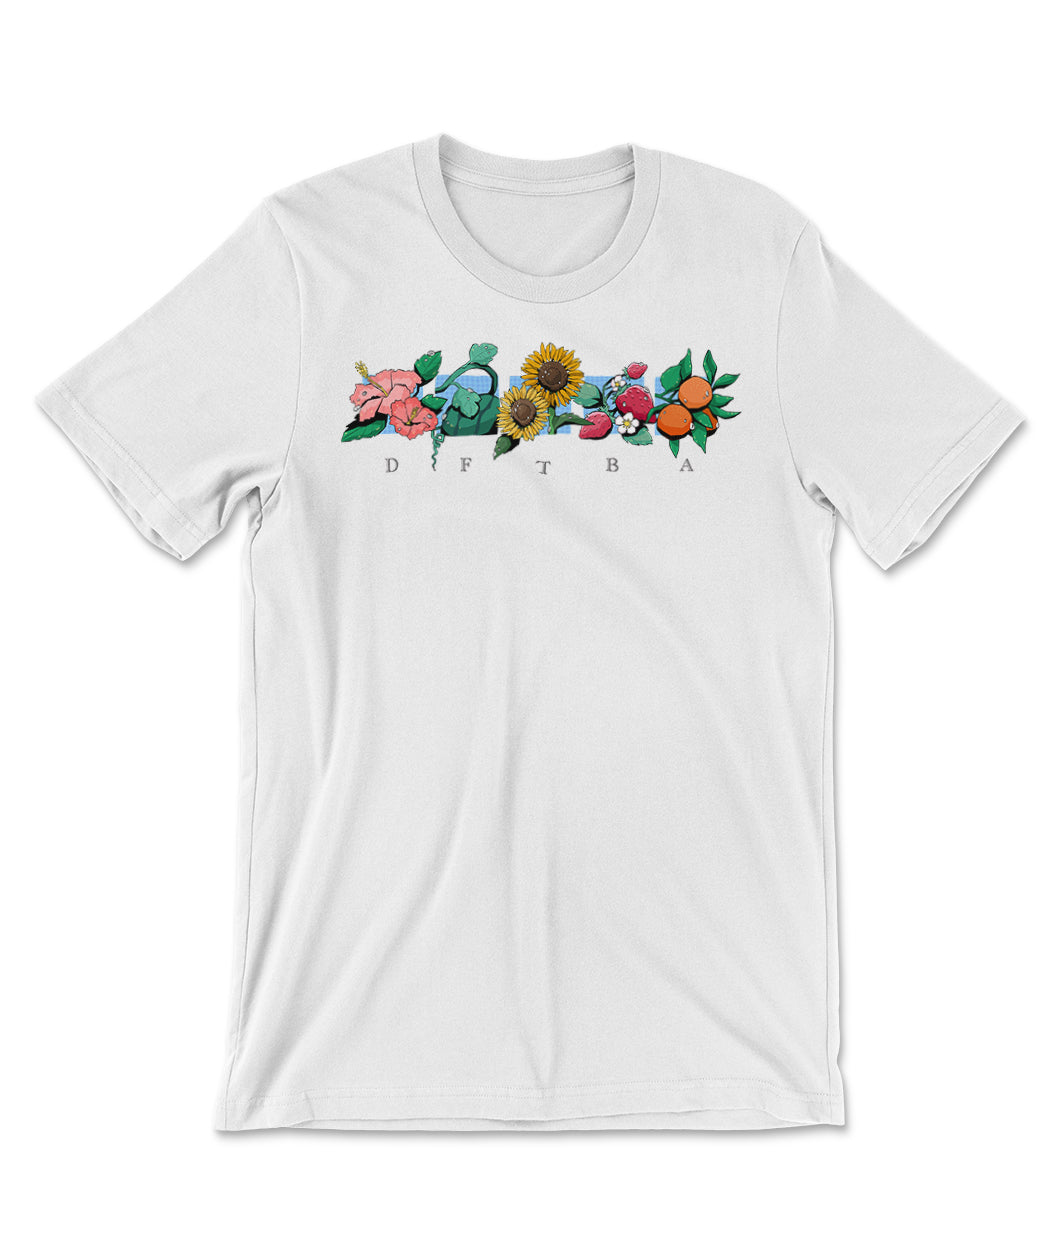 A white t-shirt with a band of colorful, illustrated flowers across the chest with the letters 